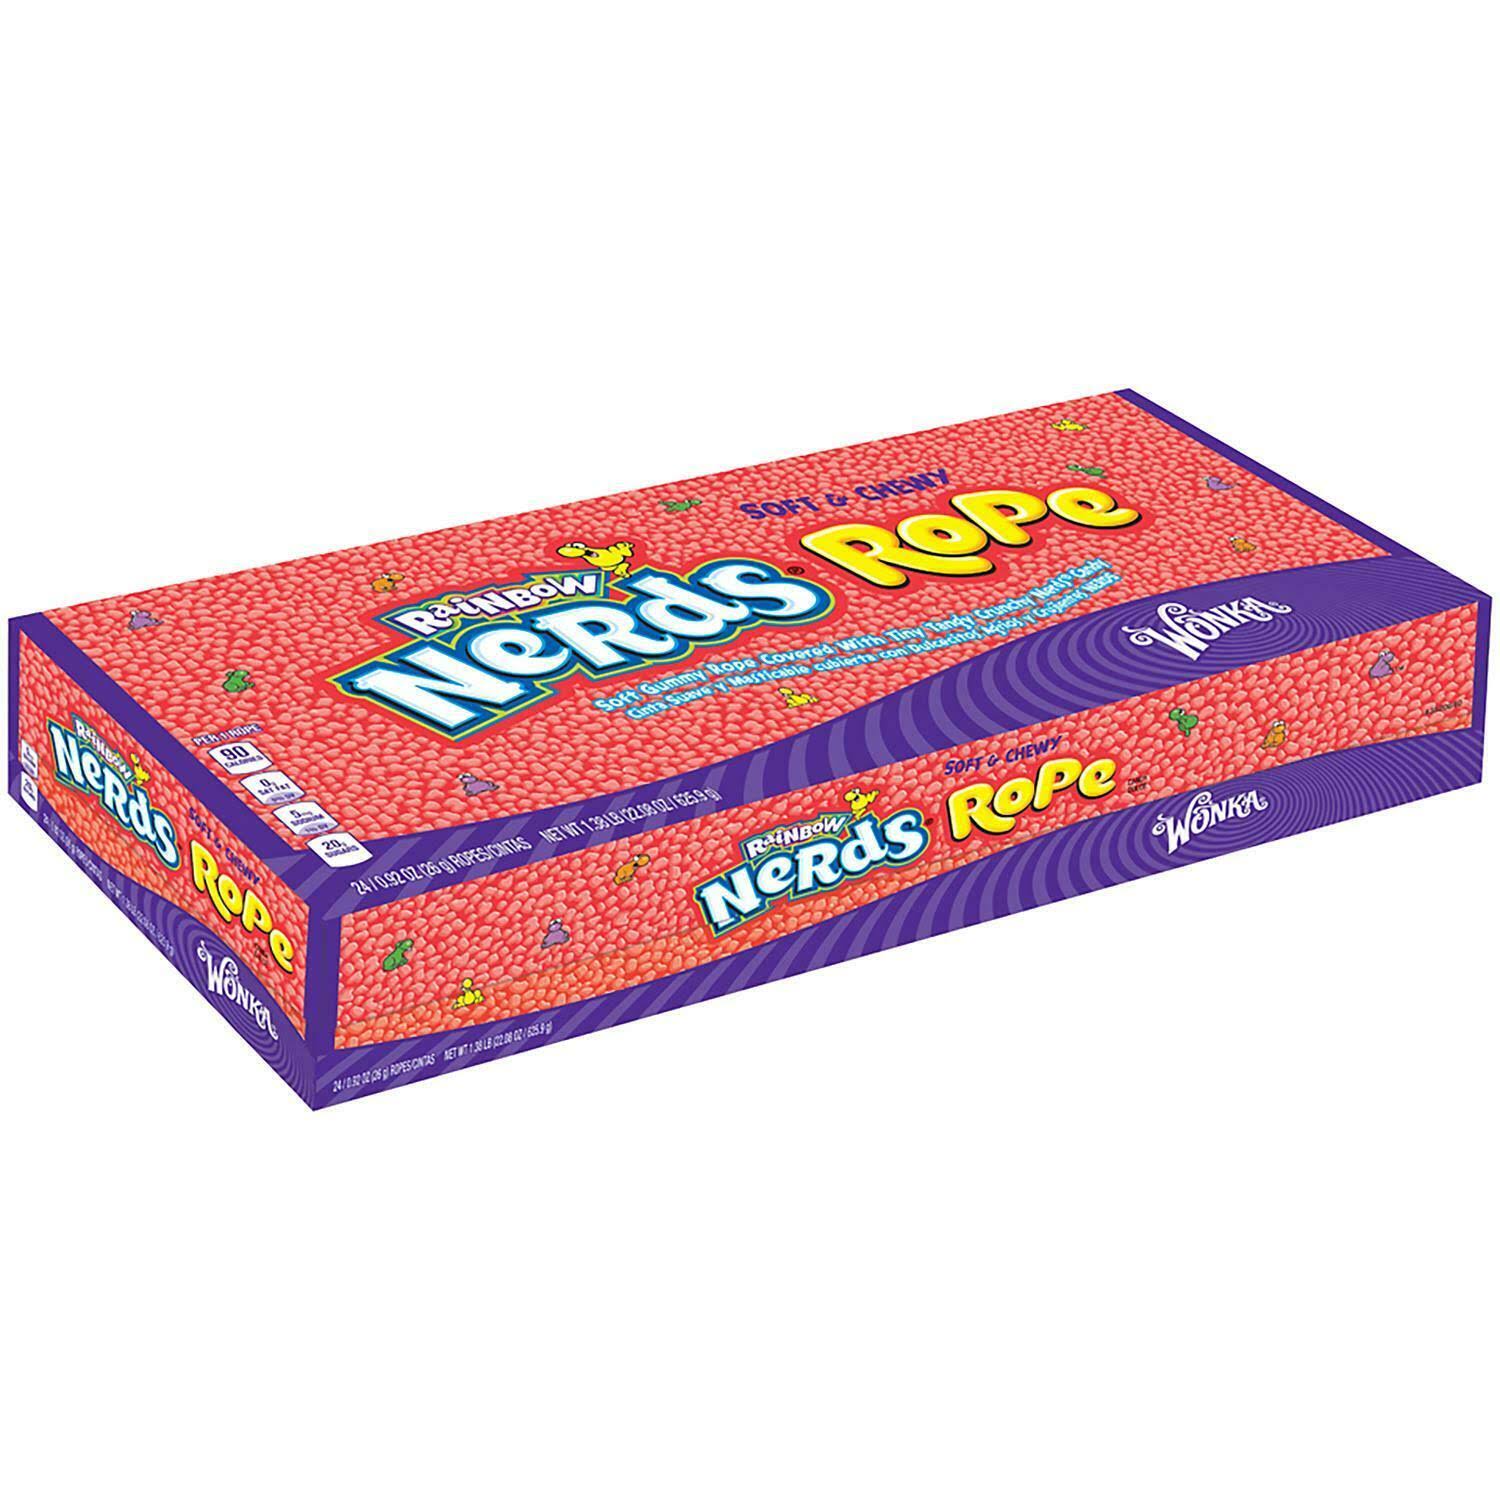 Rainbow Nerds Soft & Chewy Rope - 0.92 packet